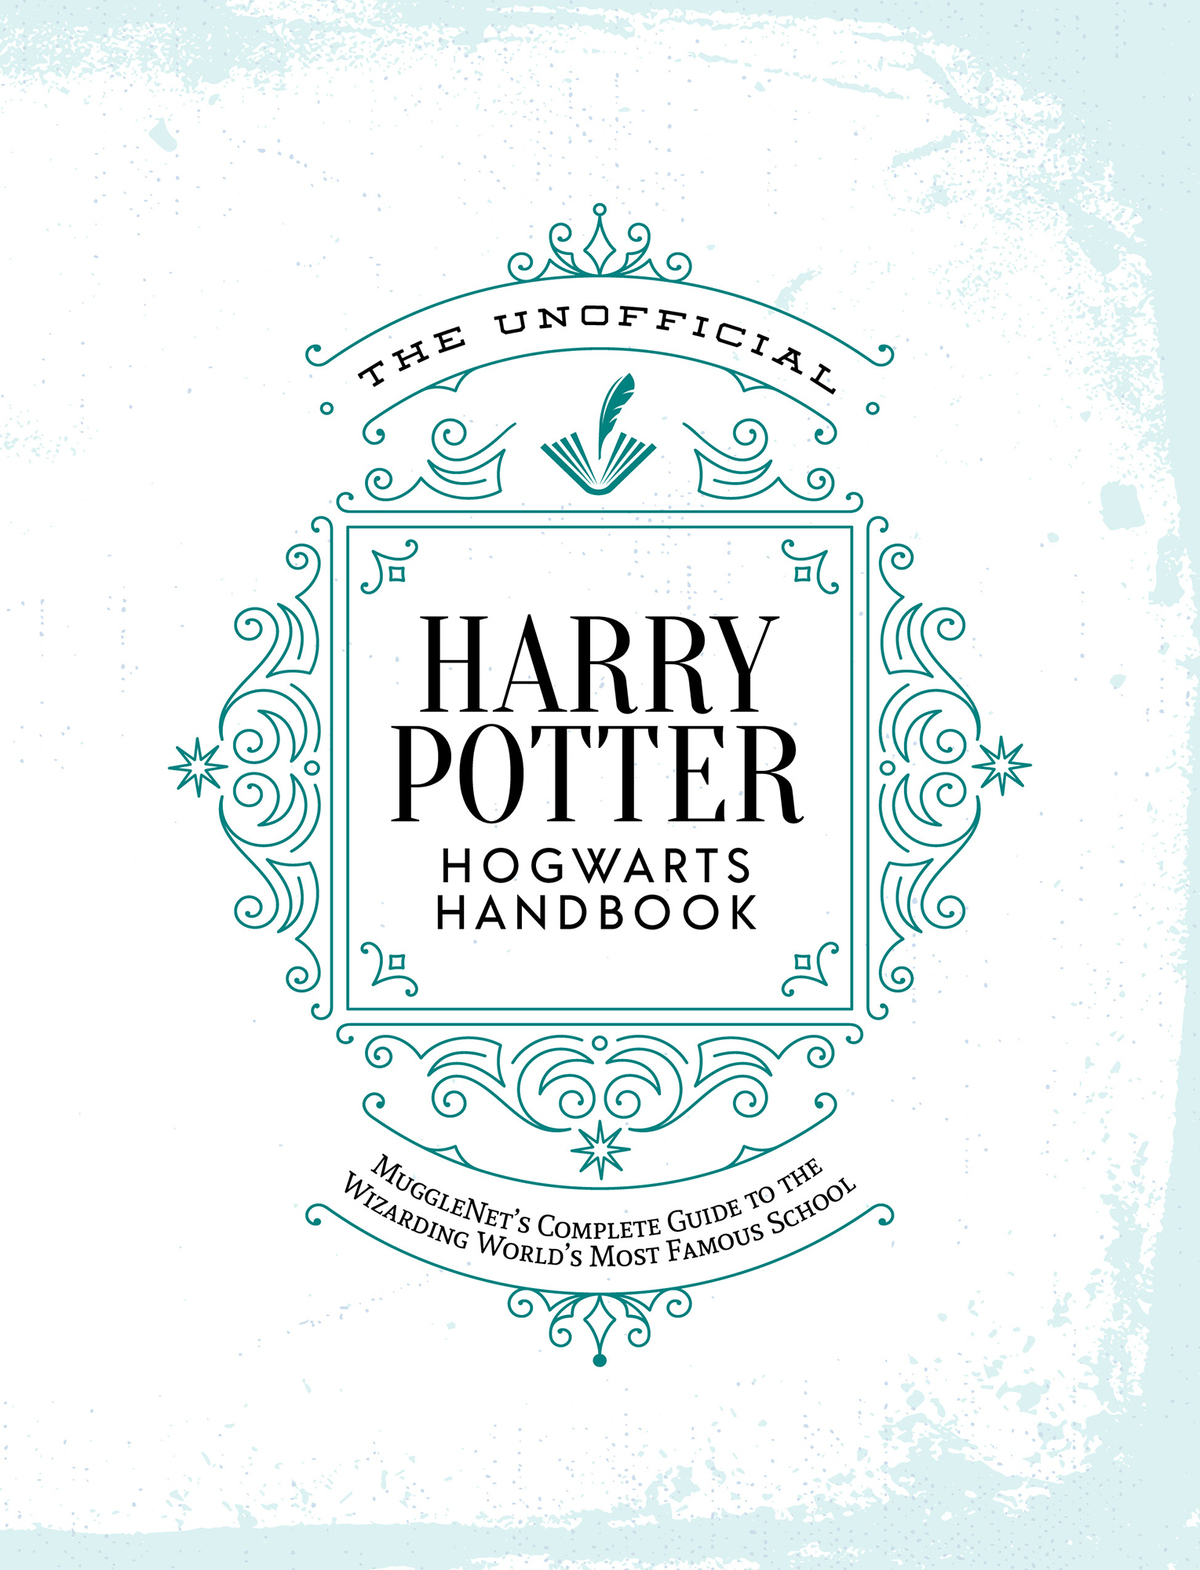 “The Unofficial Harry Potter Hogwarts Handbook” title page